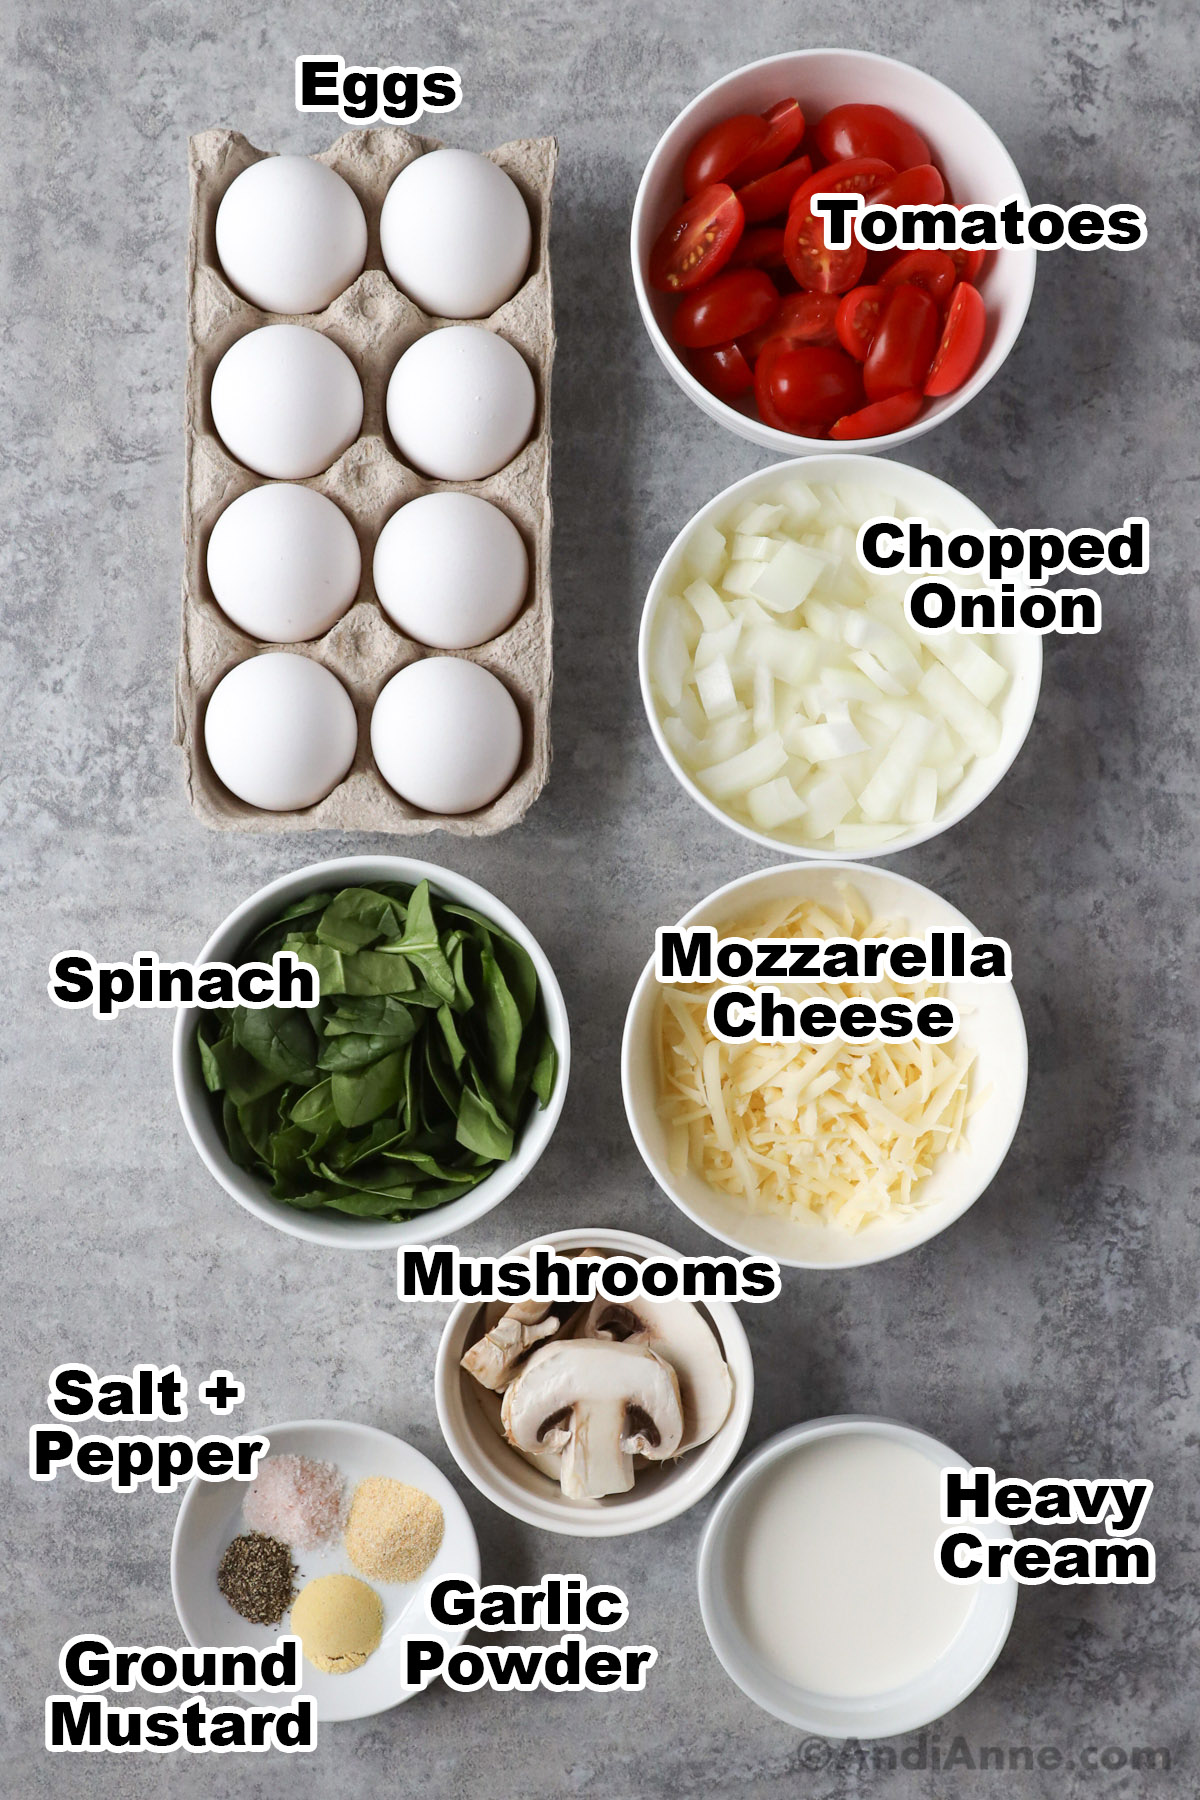 Eggs, bowls of chopped tomatoes, onion, spinach, shredded mozzarella, mushrooms, heavy cream, and spices.